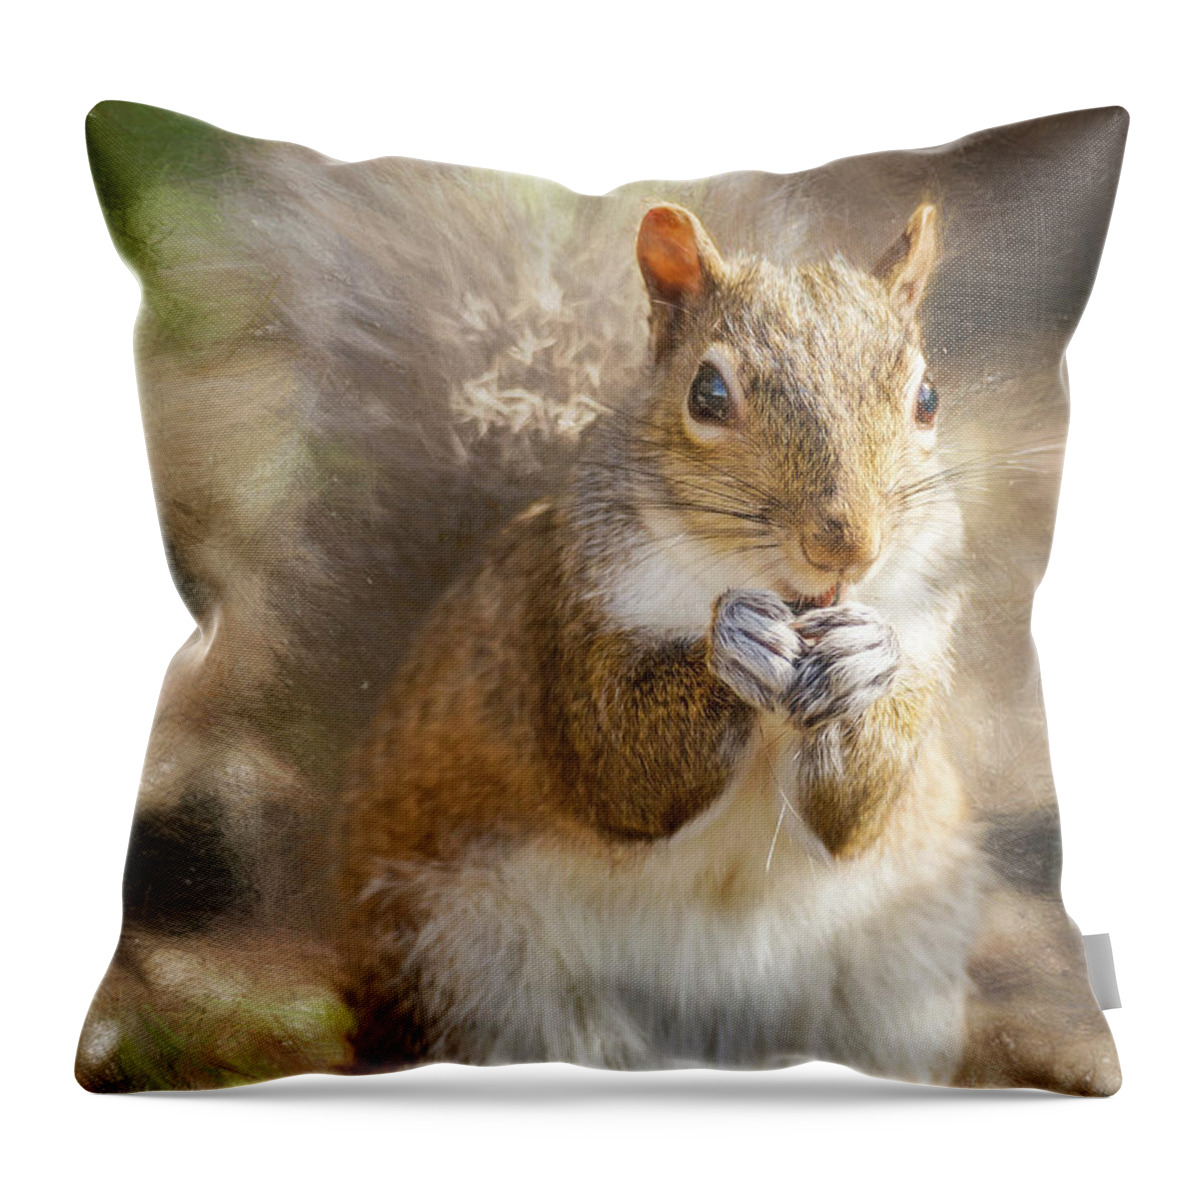 Rodent Throw Pillow featuring the photograph Surreptitious Squirrel by Bill and Linda Tiepelman